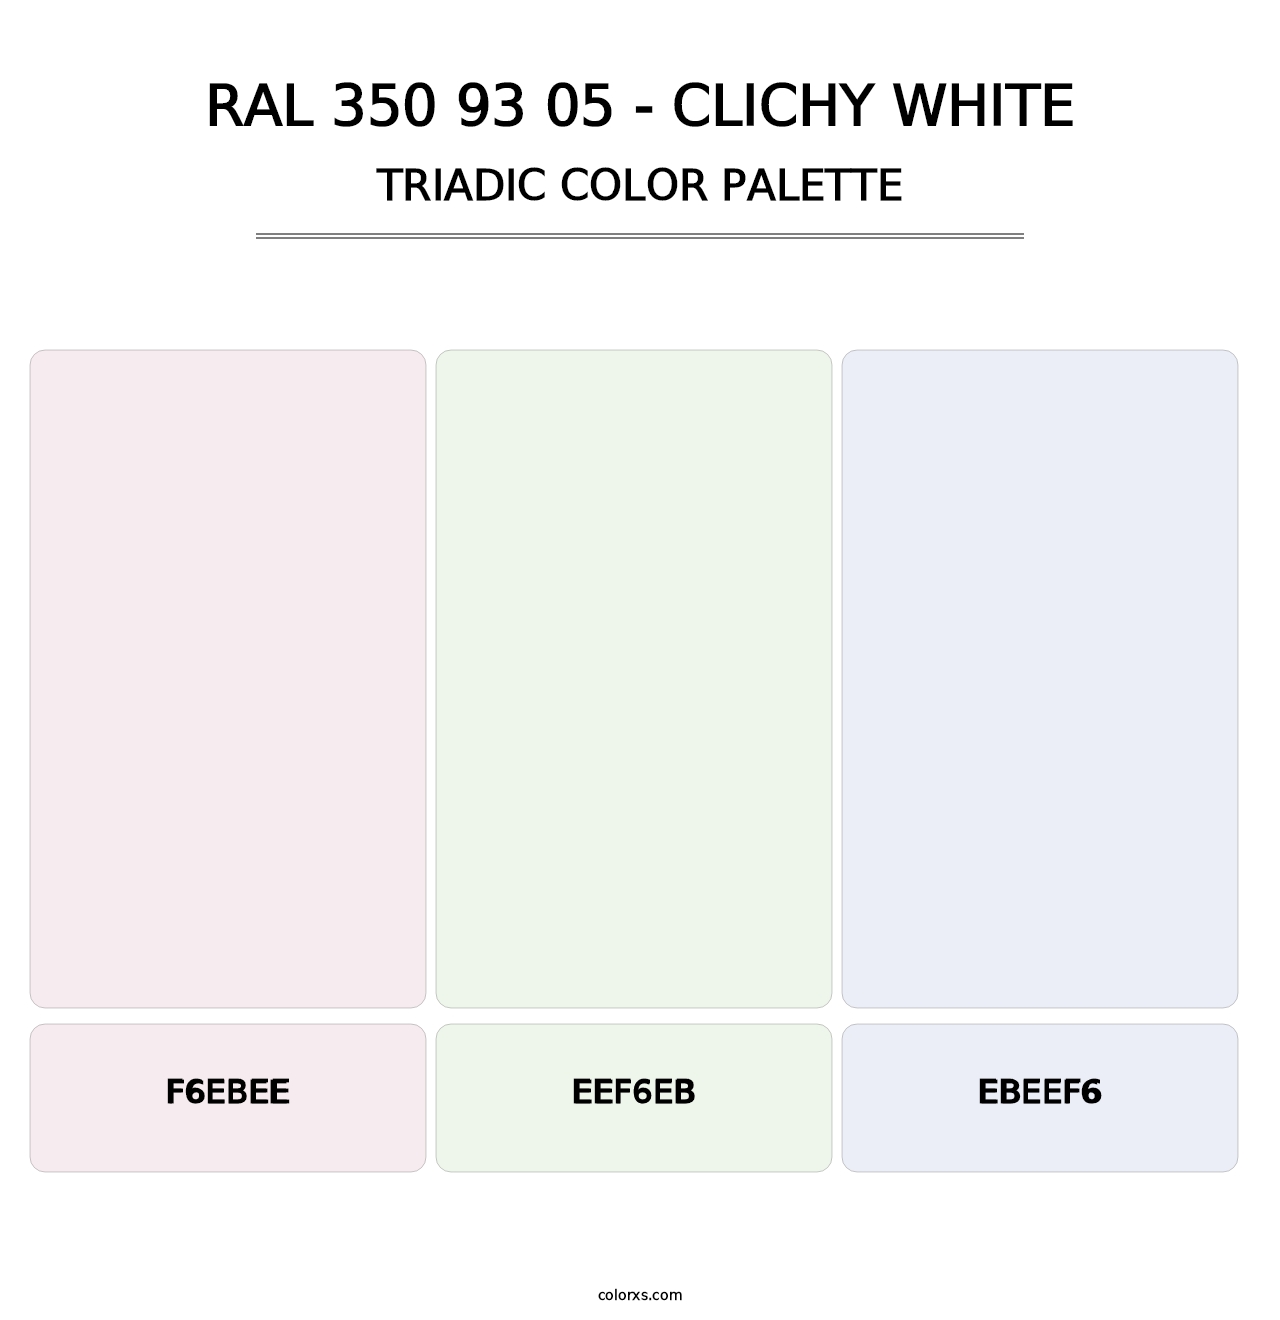 RAL 350 93 05 - Clichy White - Triadic Color Palette